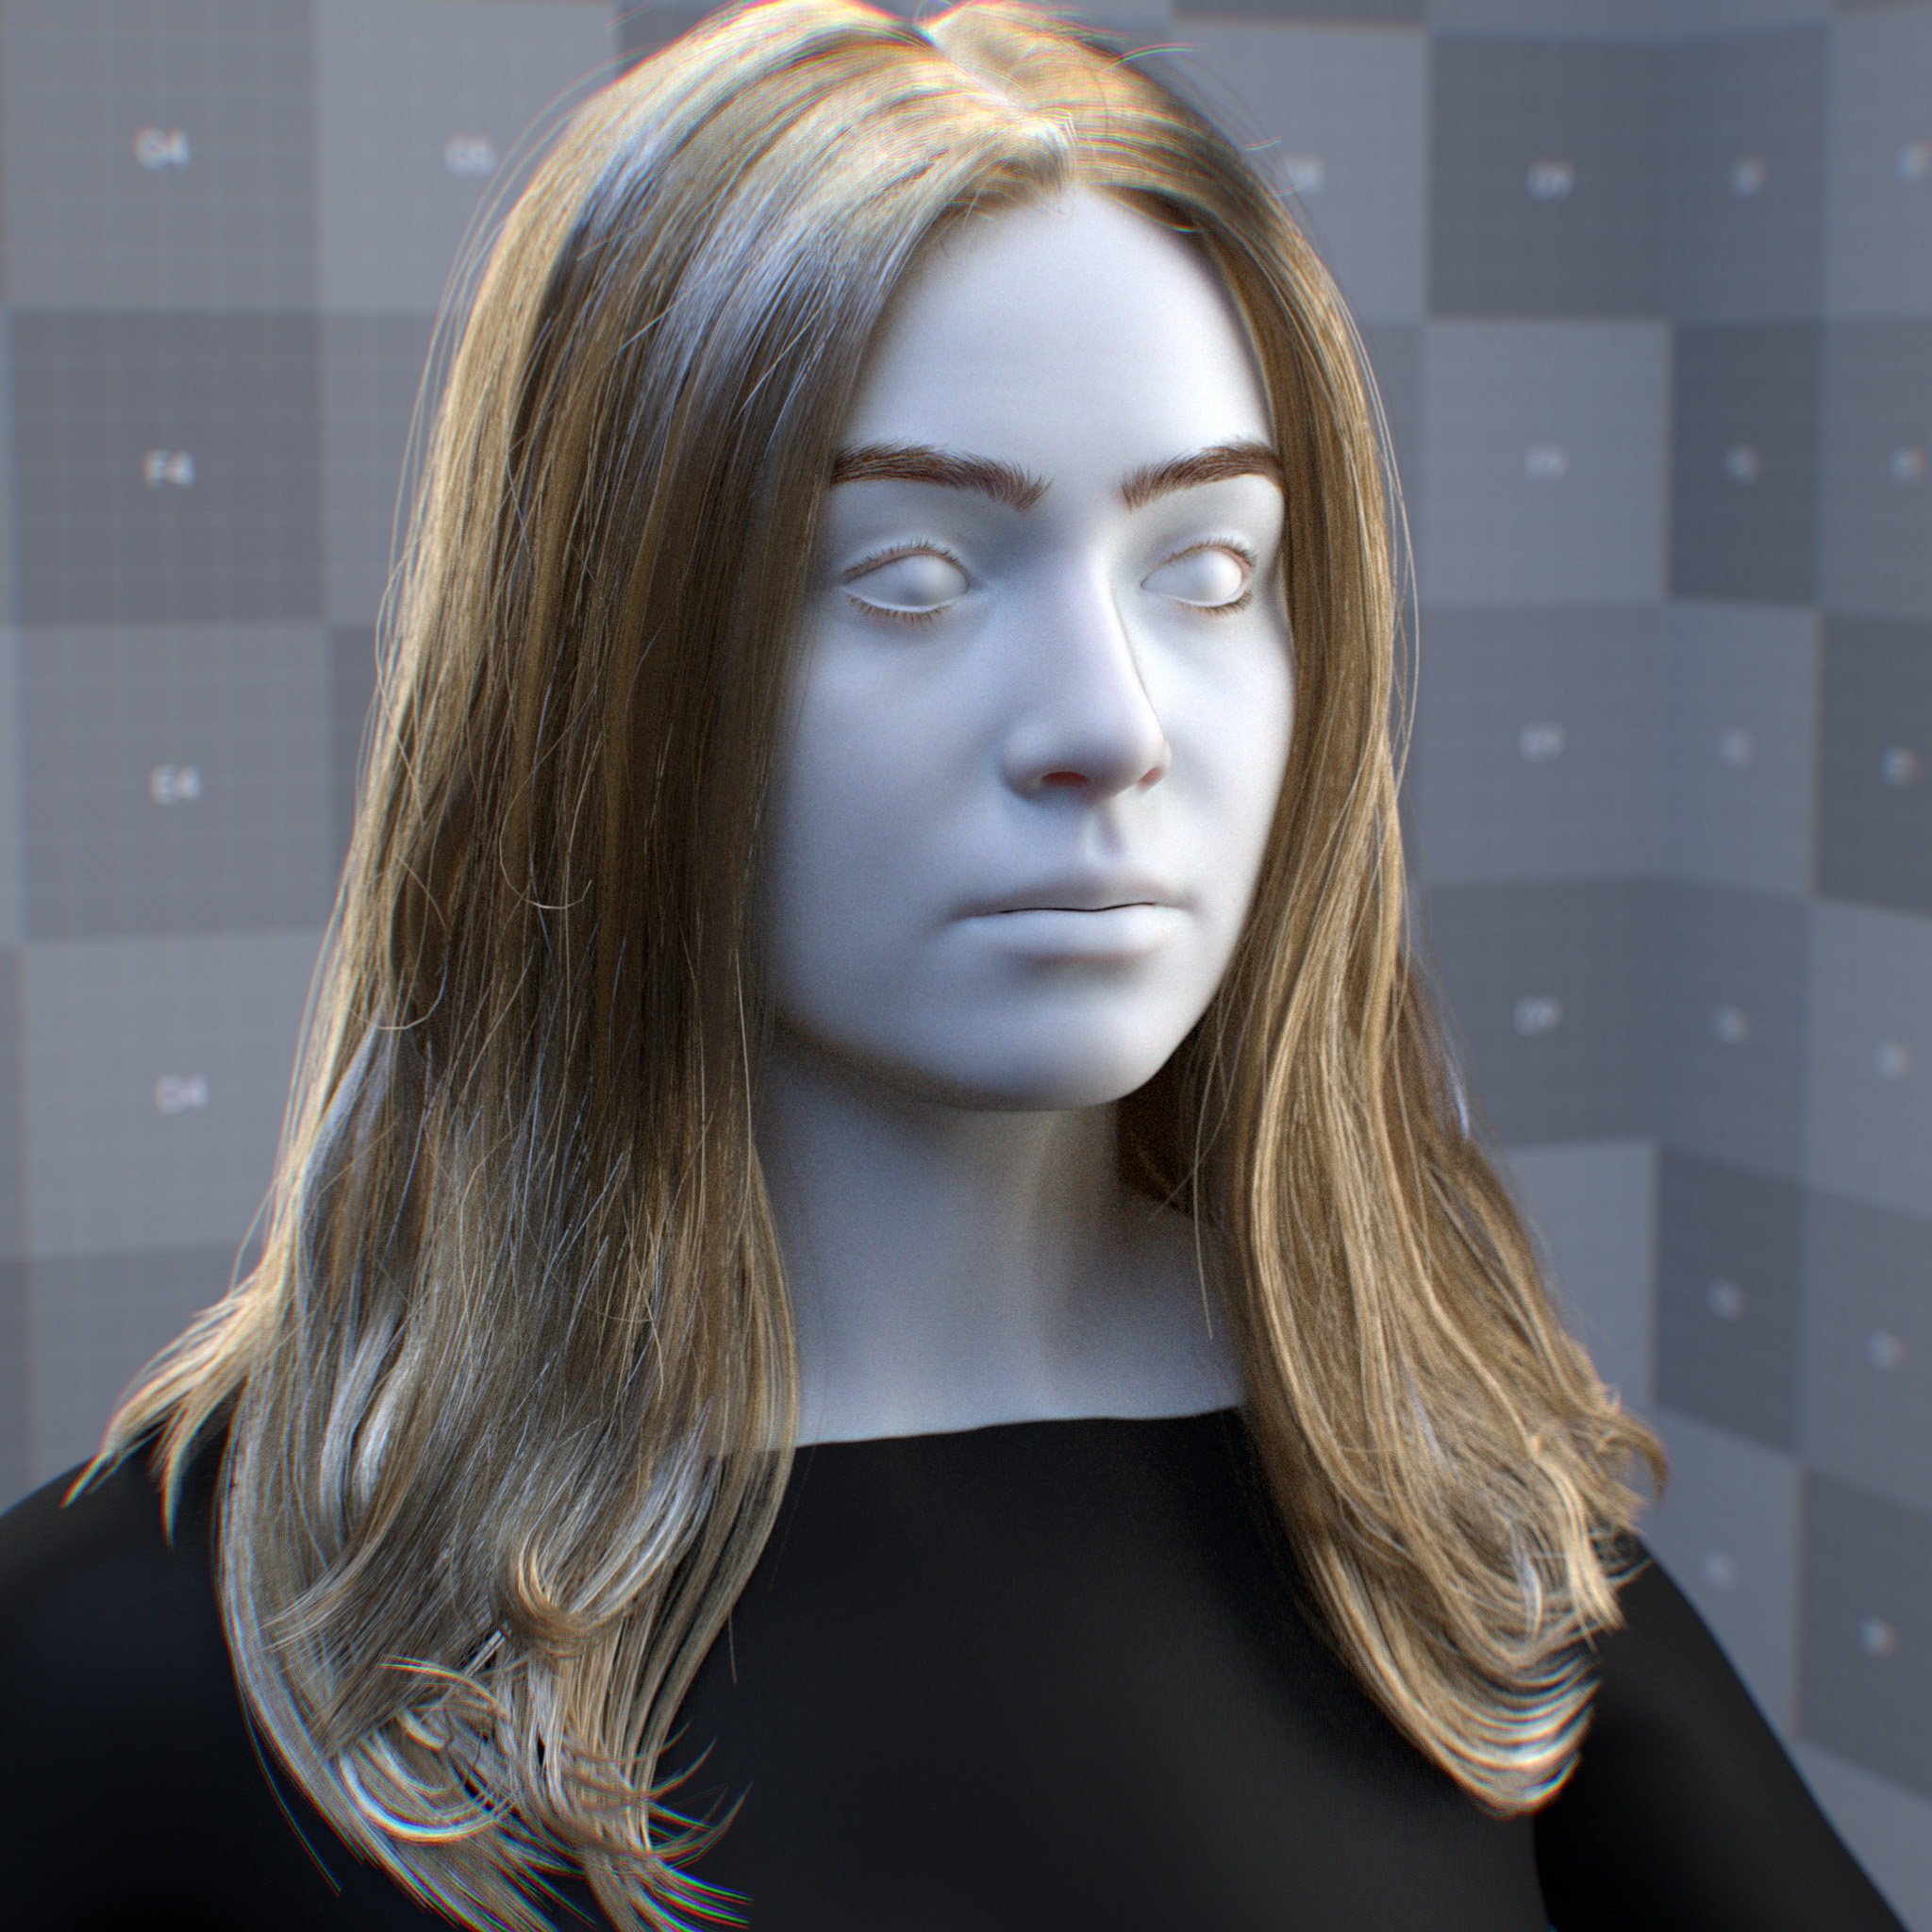 rtx_material_omnihairbase_specular_reflection_azimuthal_roughness_w0p1